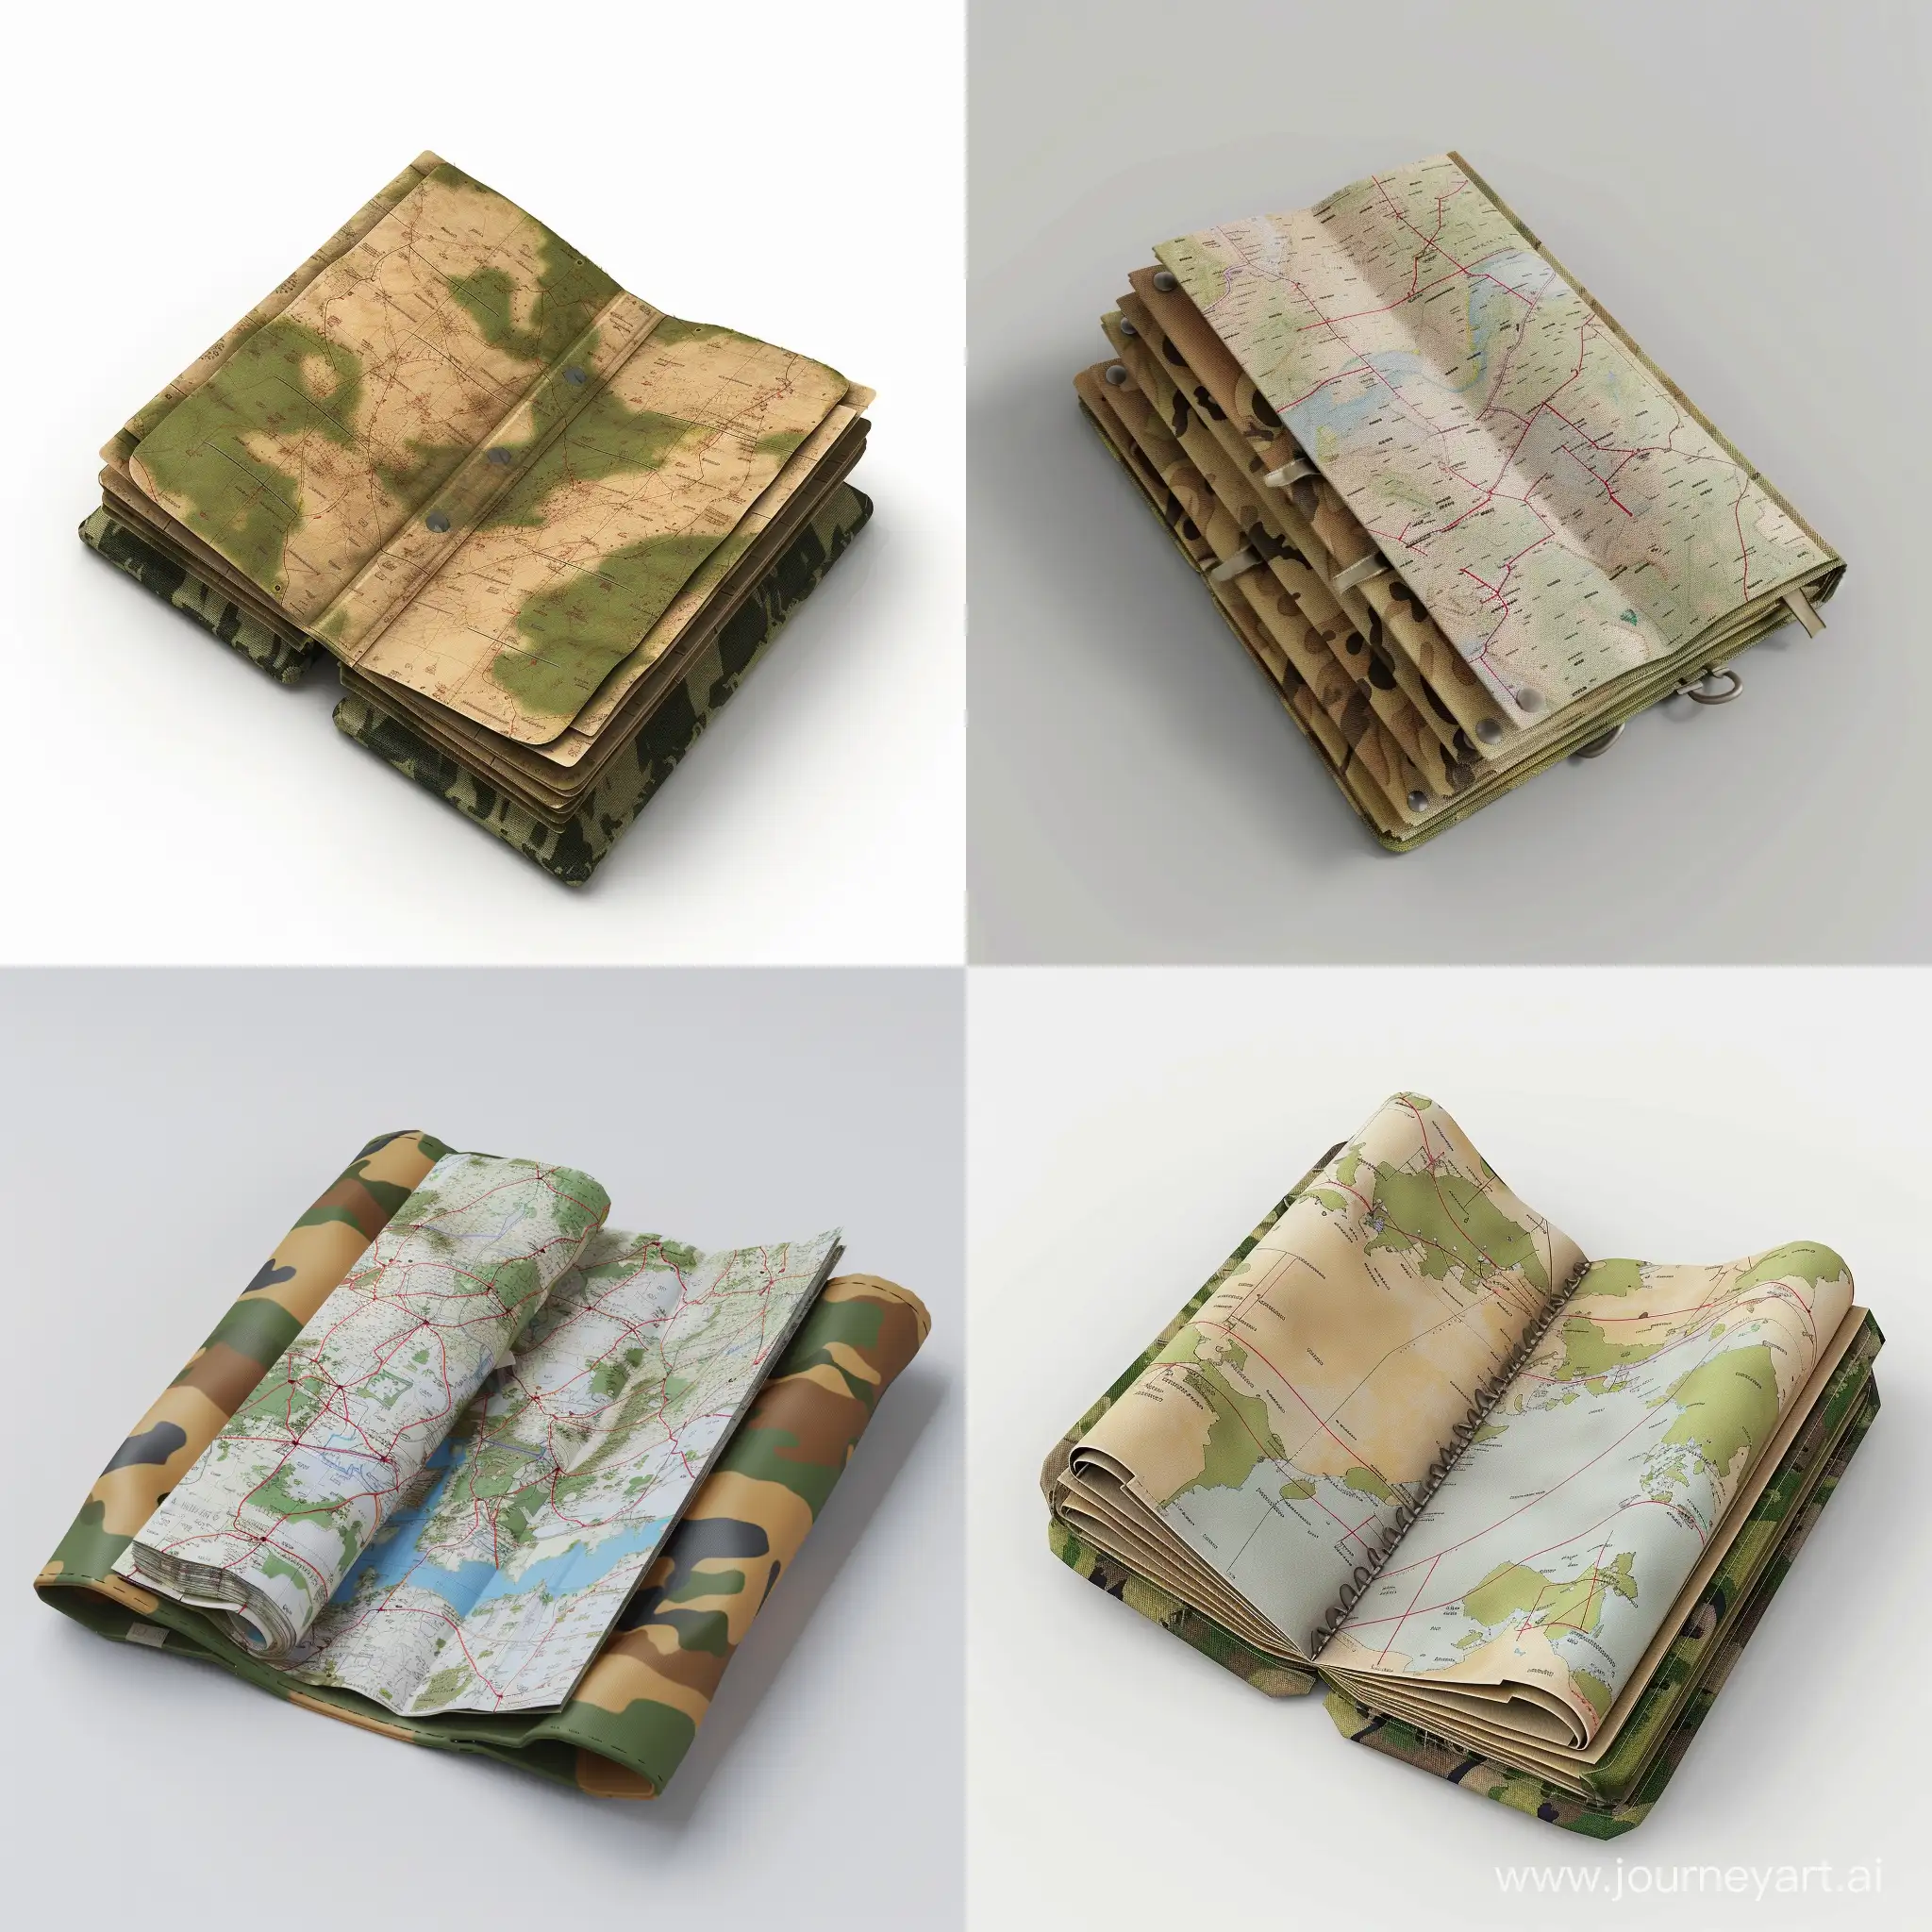 Isometric-Military-Mapping-Cartographic-Kit-Folded-Paper-3D-Render